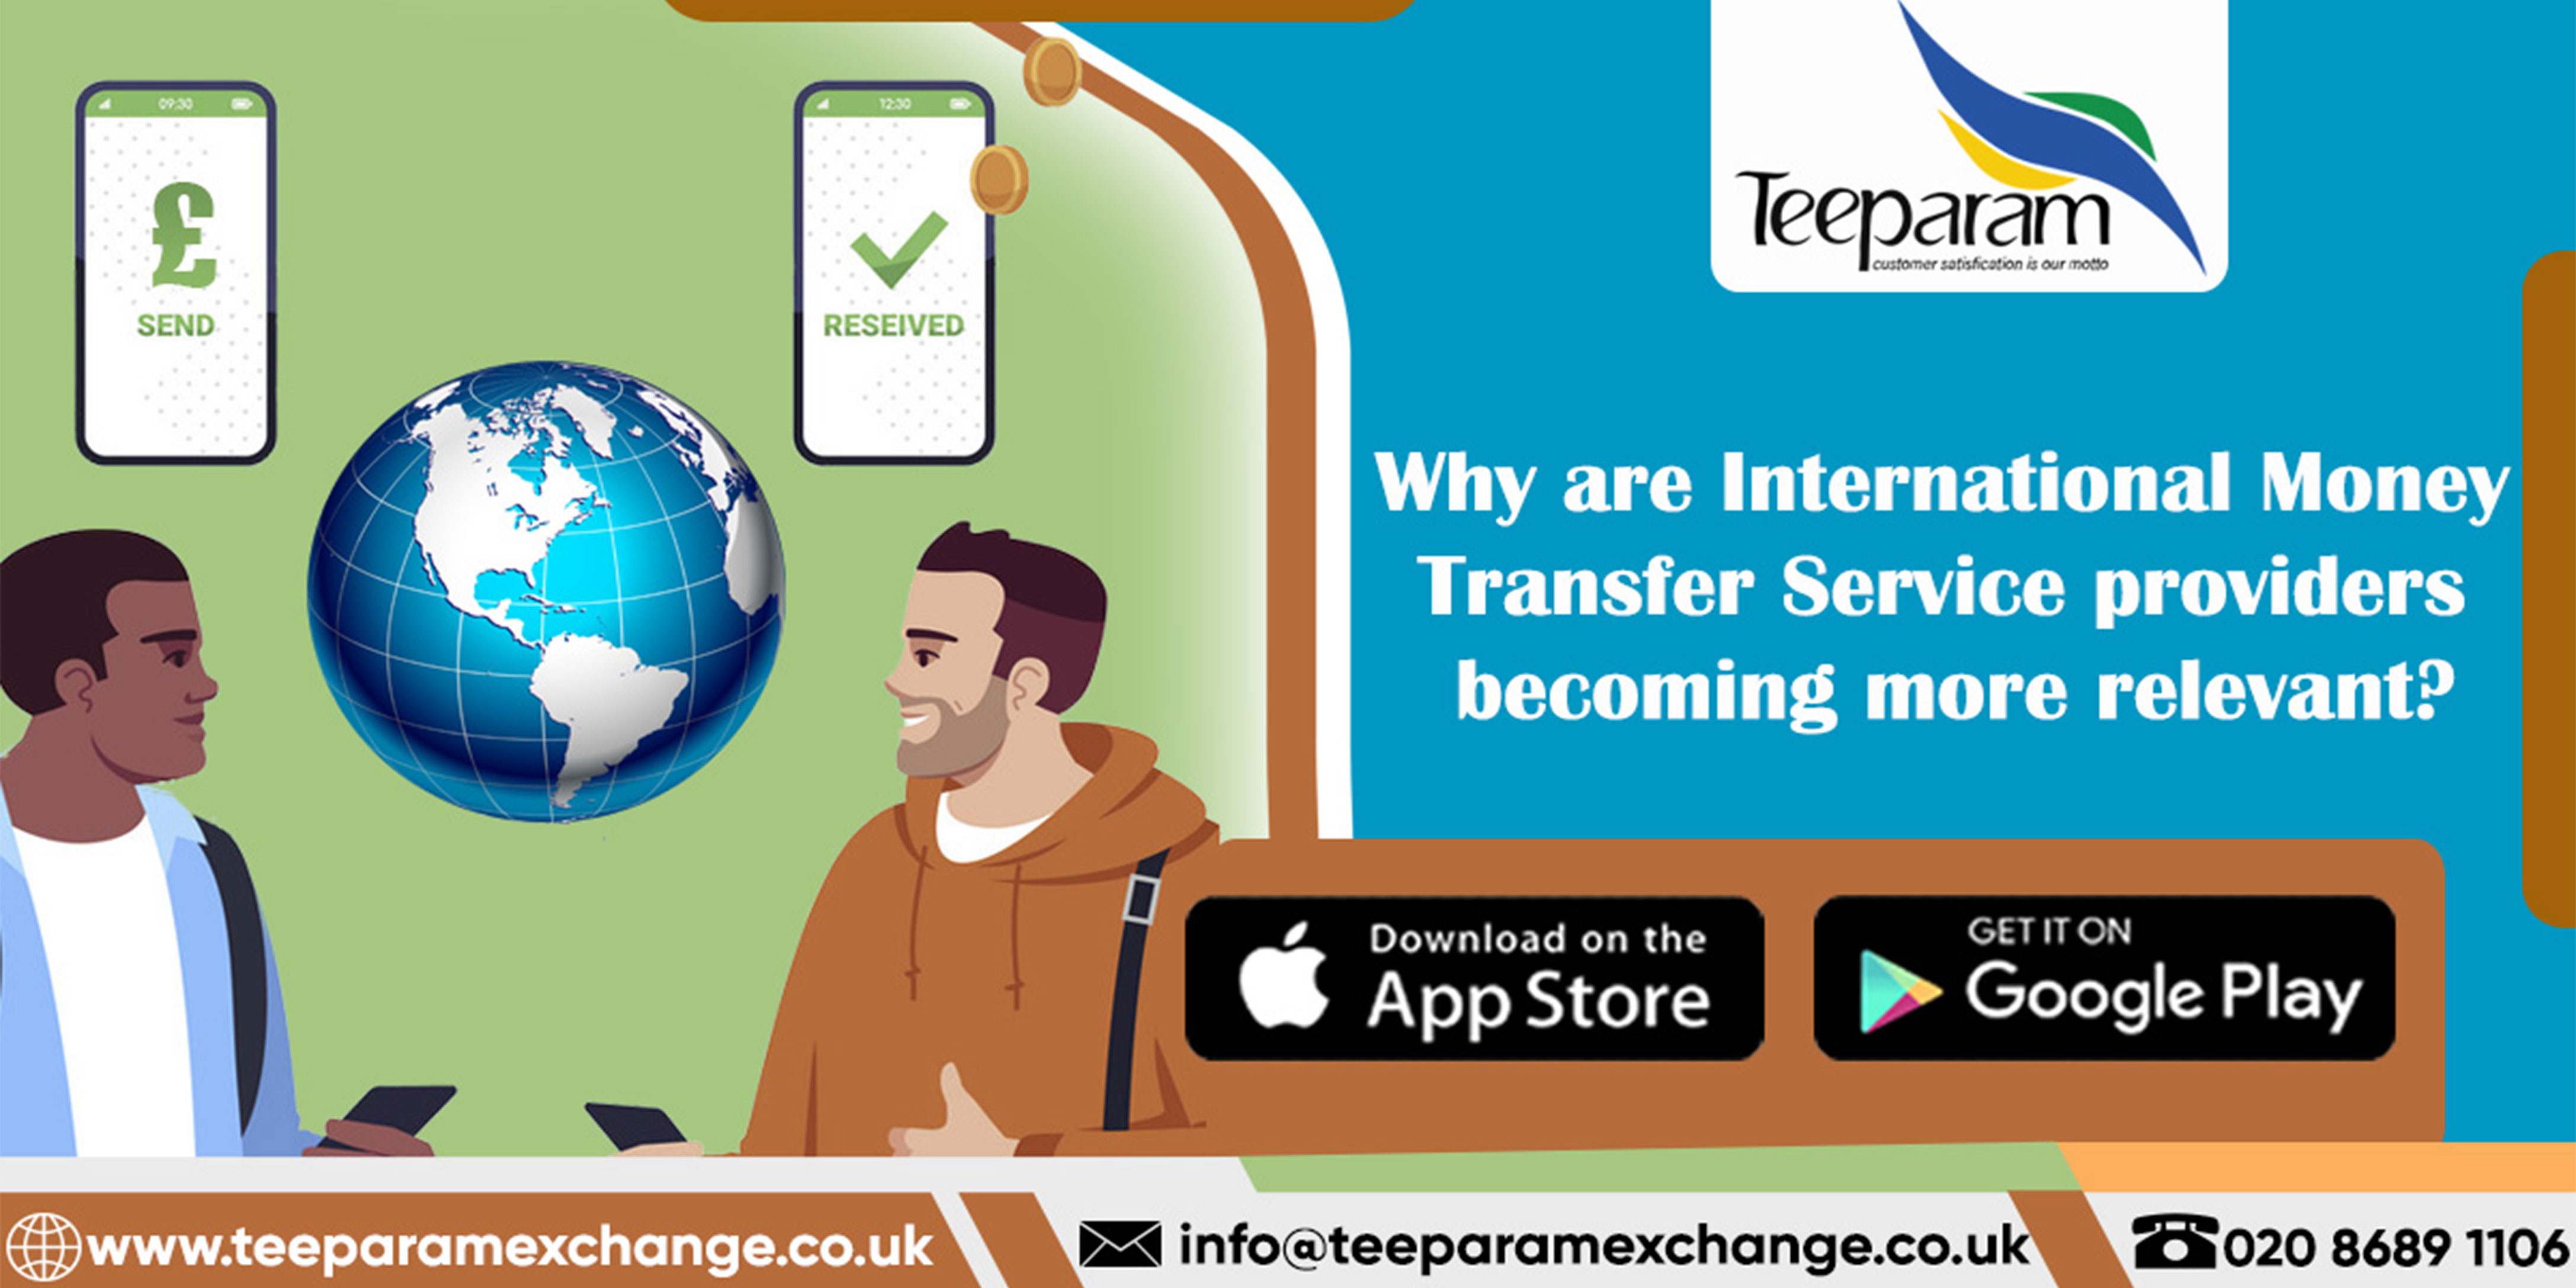 Why are International Money Transfer Service providers becoming more relevant?